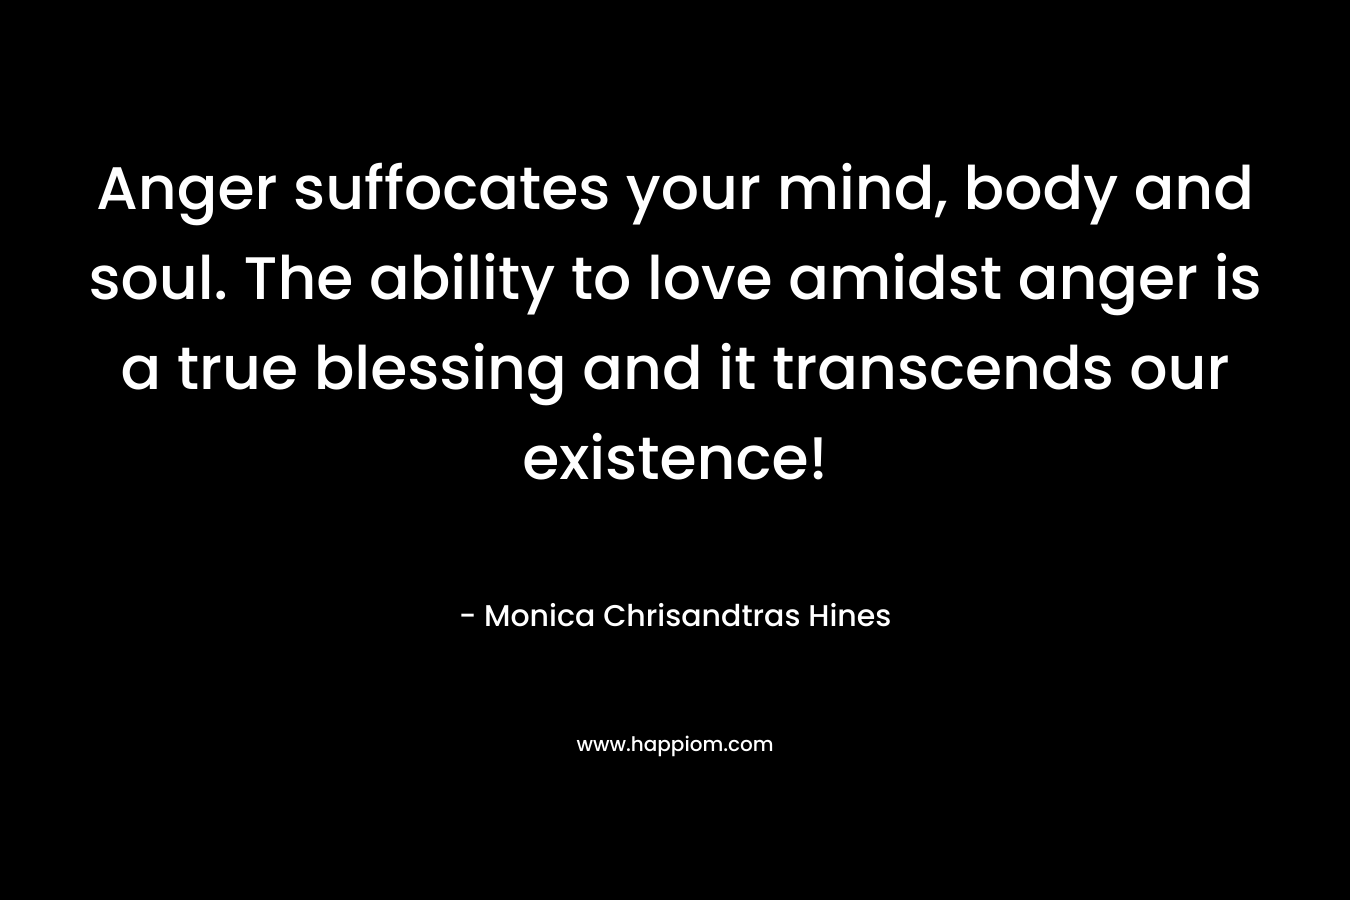 Anger suffocates your mind, body and soul. The ability to love amidst anger is a true blessing and it transcends our existence! – Monica Chrisandtras Hines